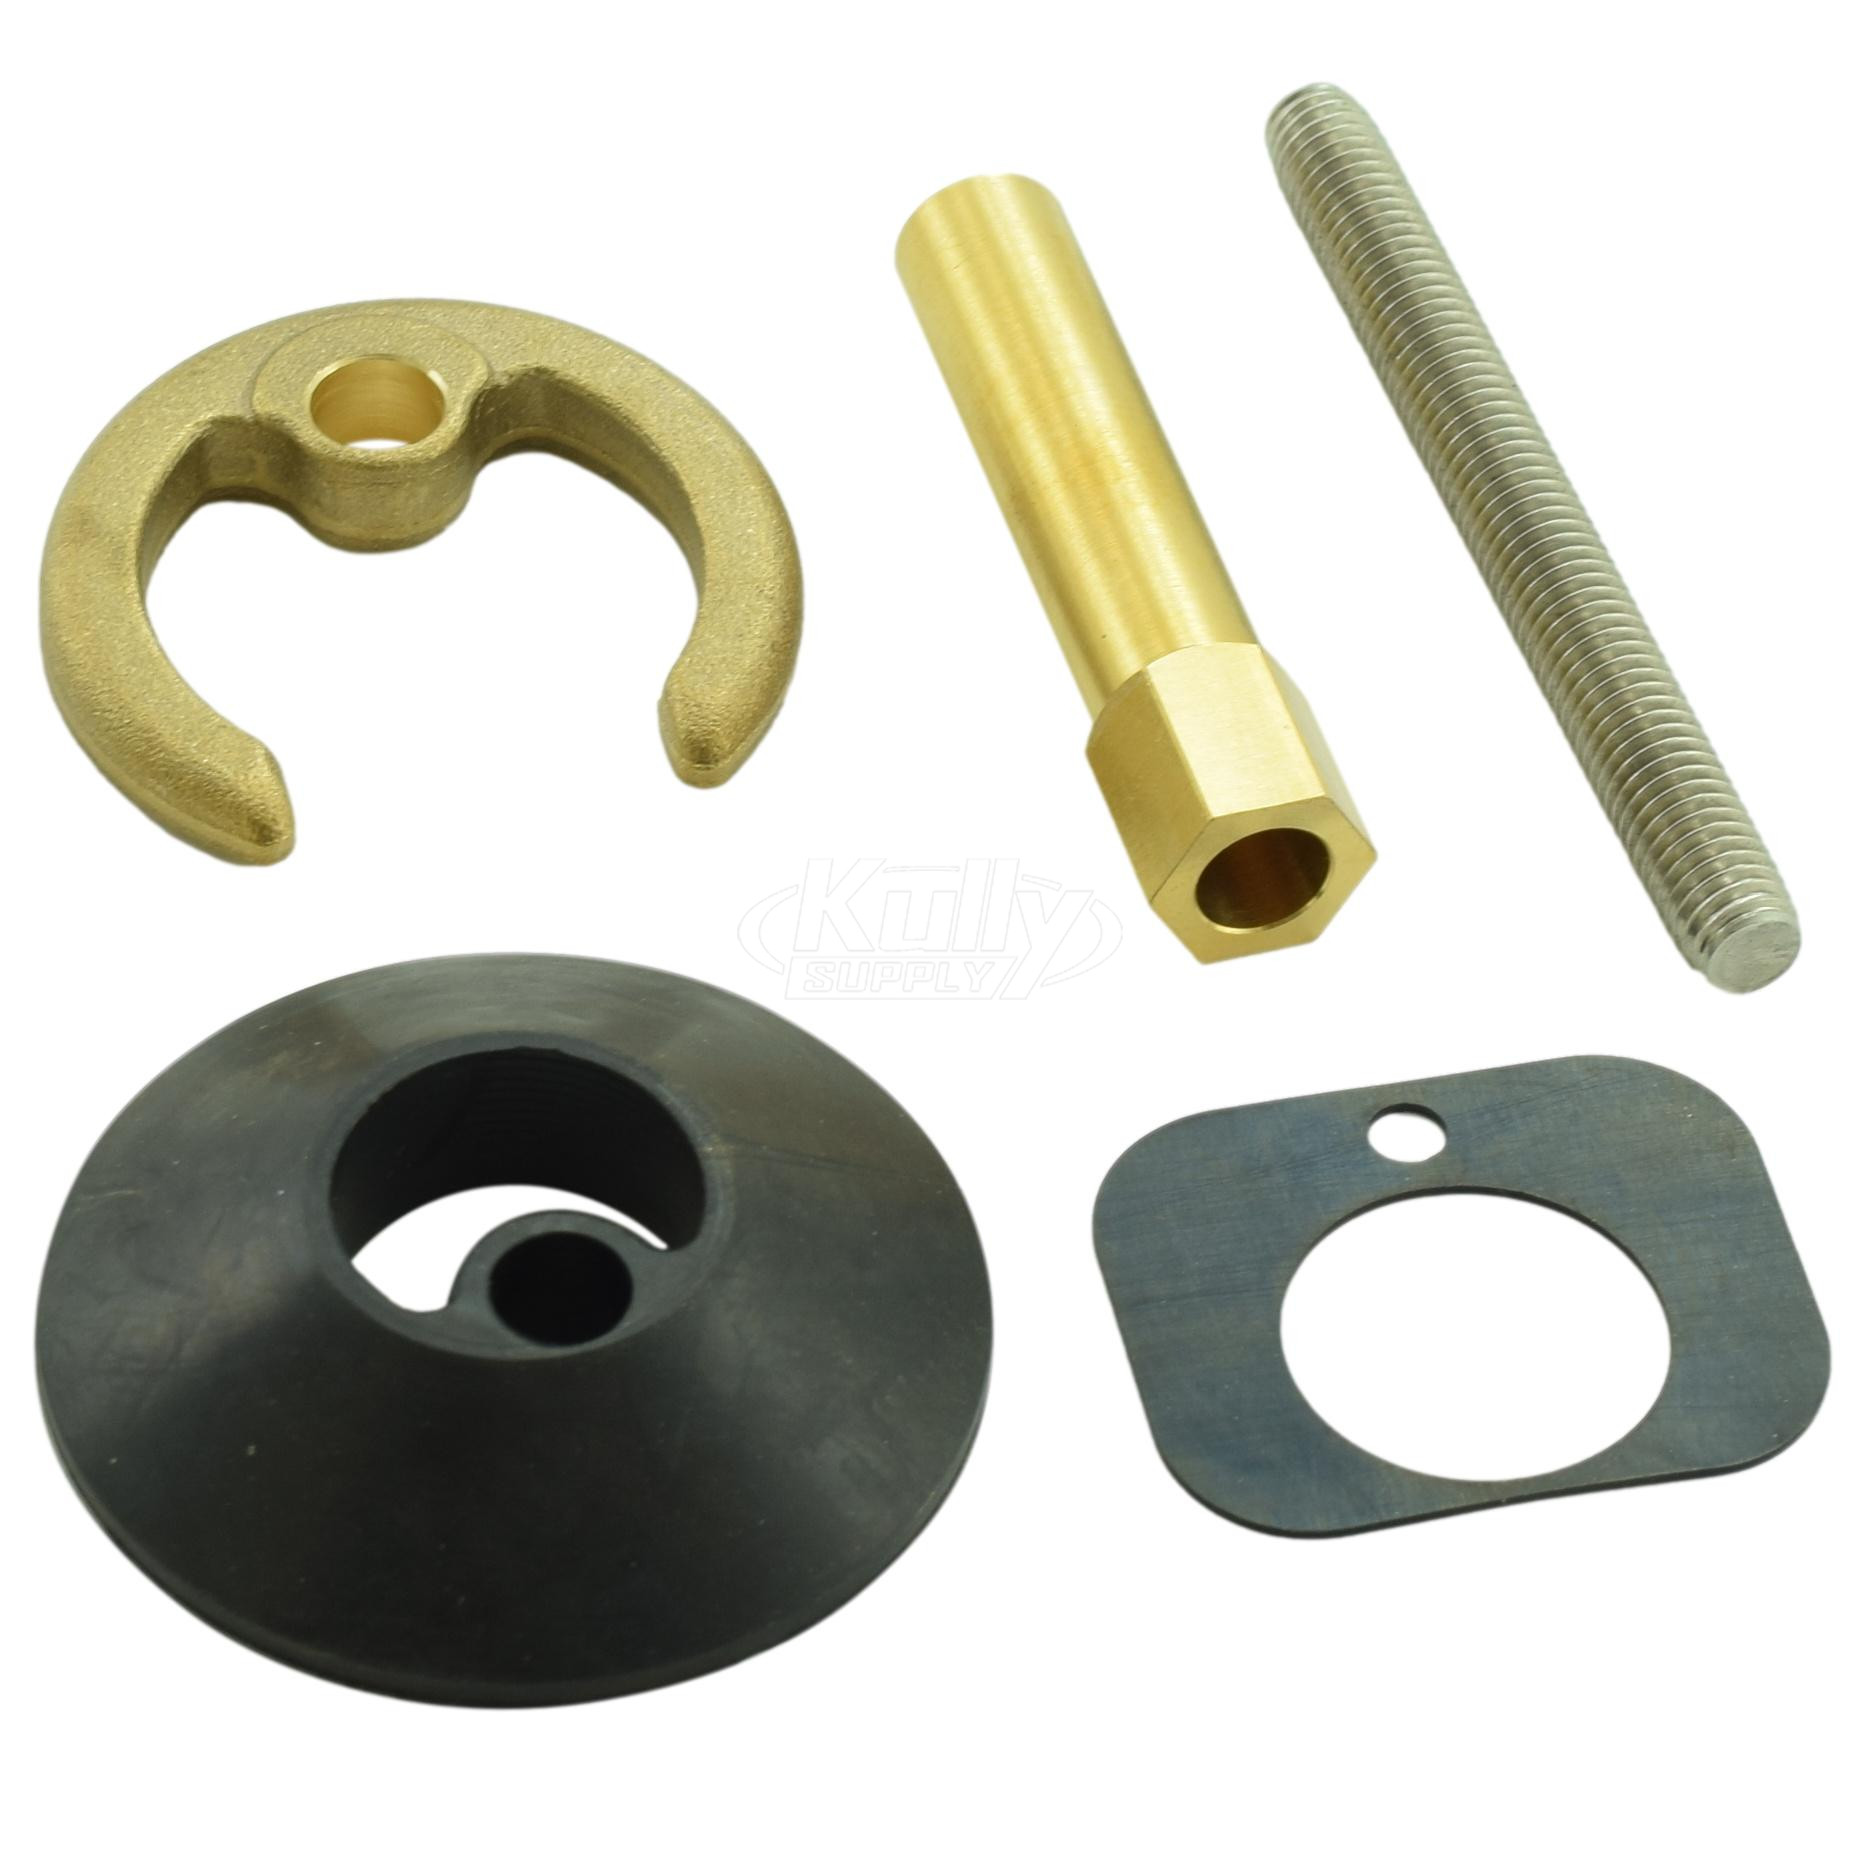 Sloan EFP37A Mounting Hardware Kit for EBF85/ETF80 Faucets